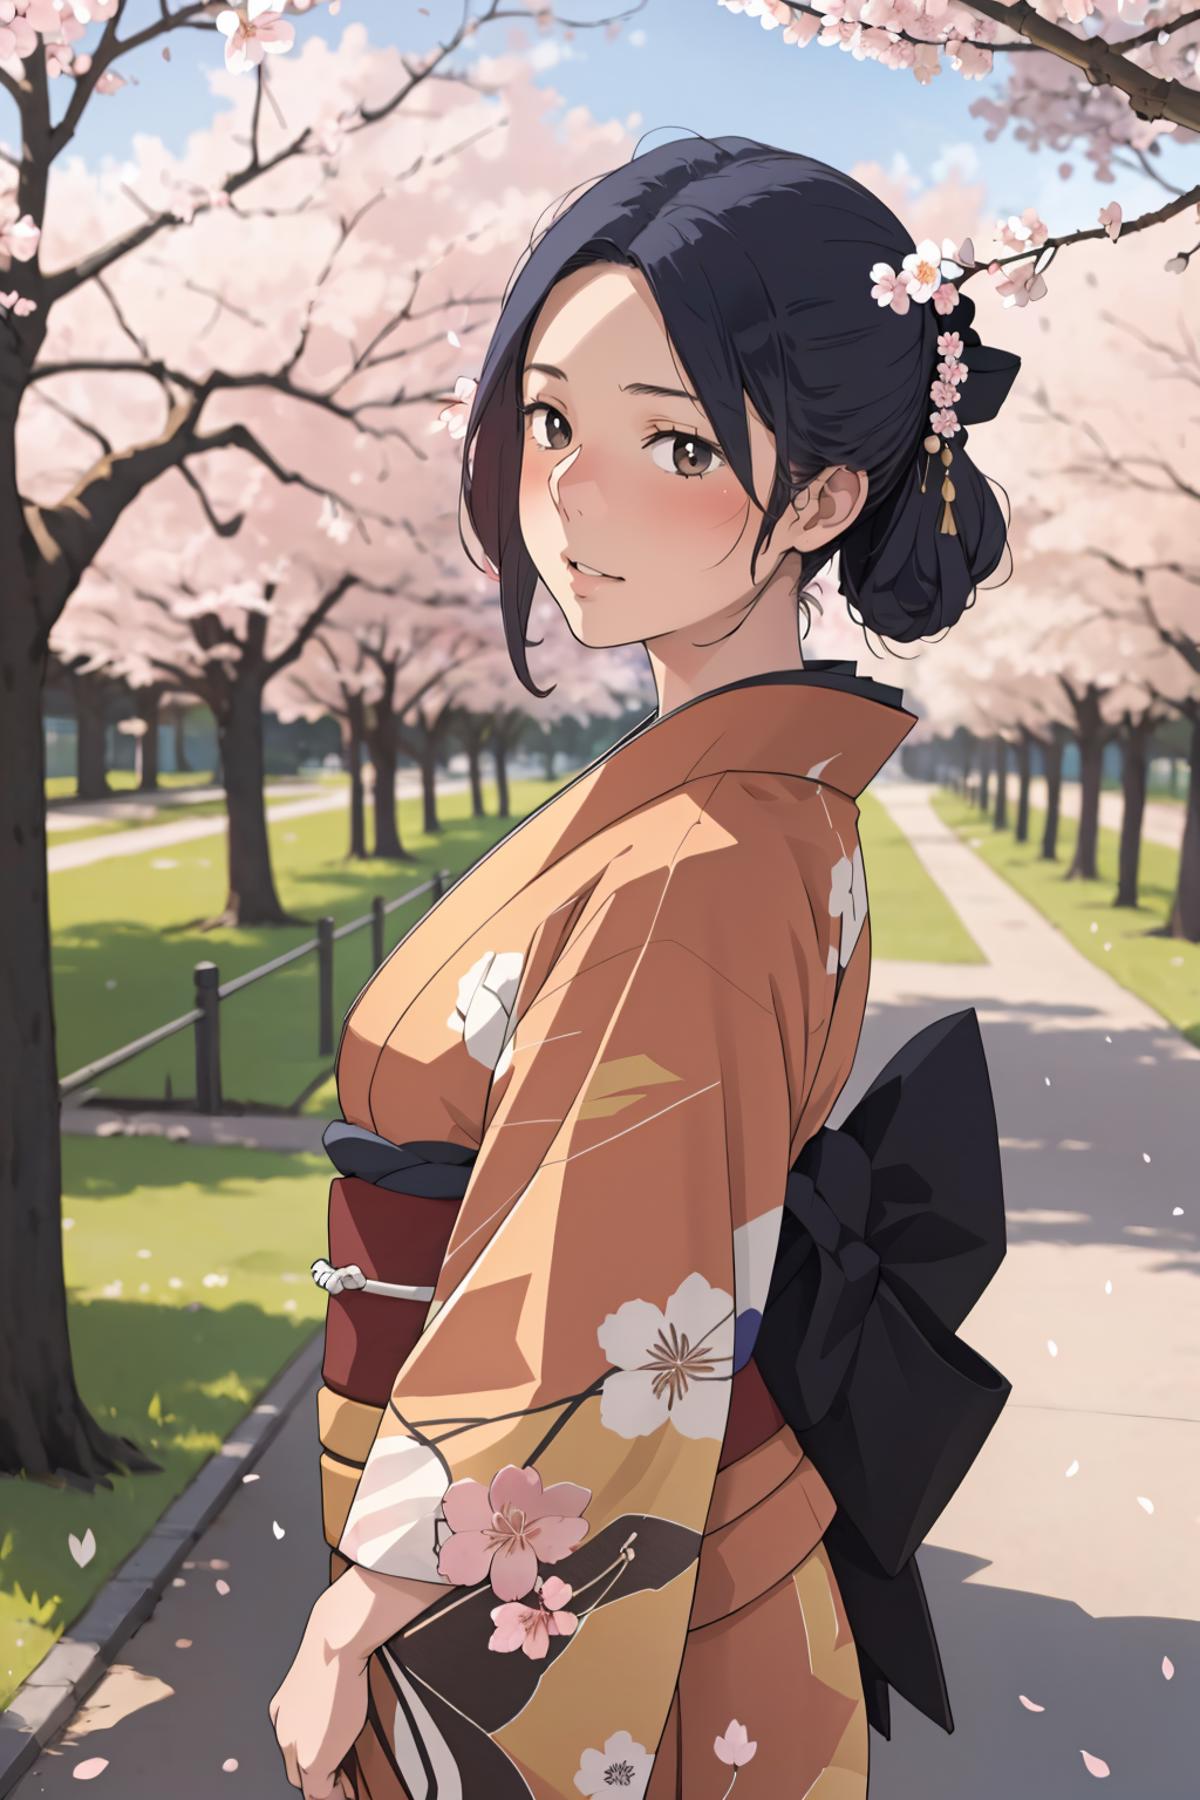 Anime-style illustration of a woman in a kimono walking down a path.